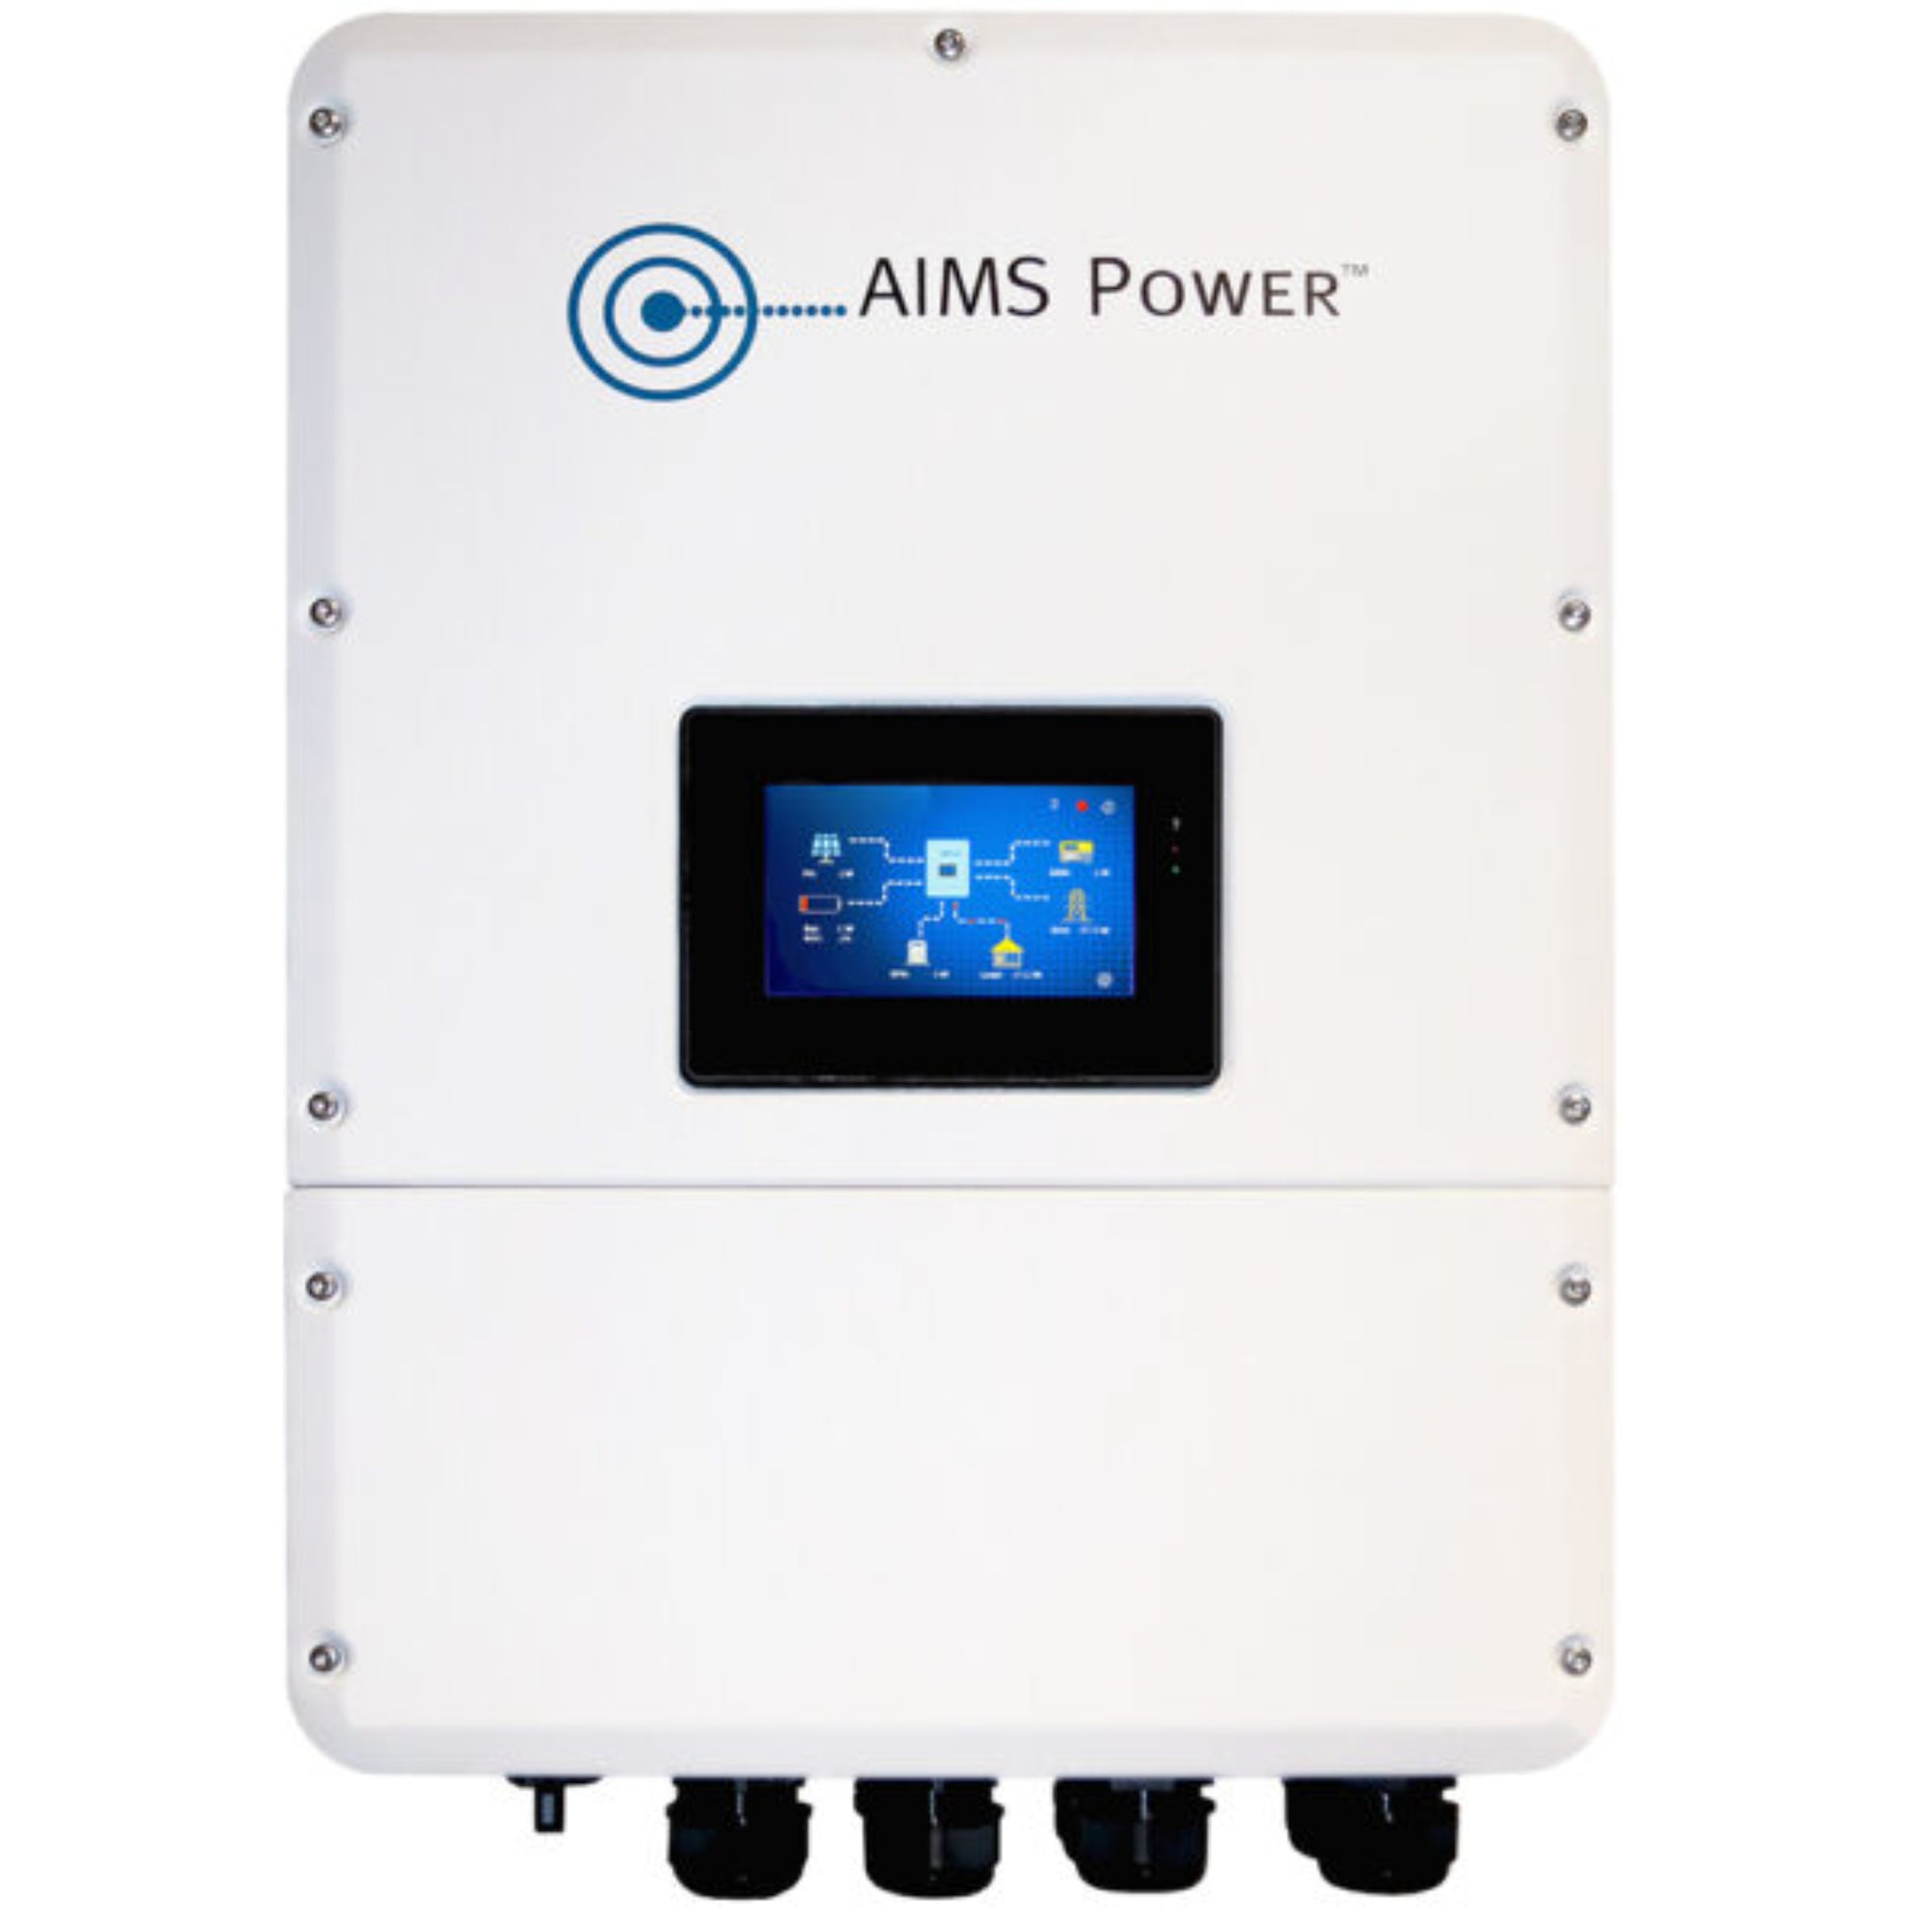 AIMS Power | Hybrid Inverter Charger | 9.6 kW Power Output | 15 kW Solar Input